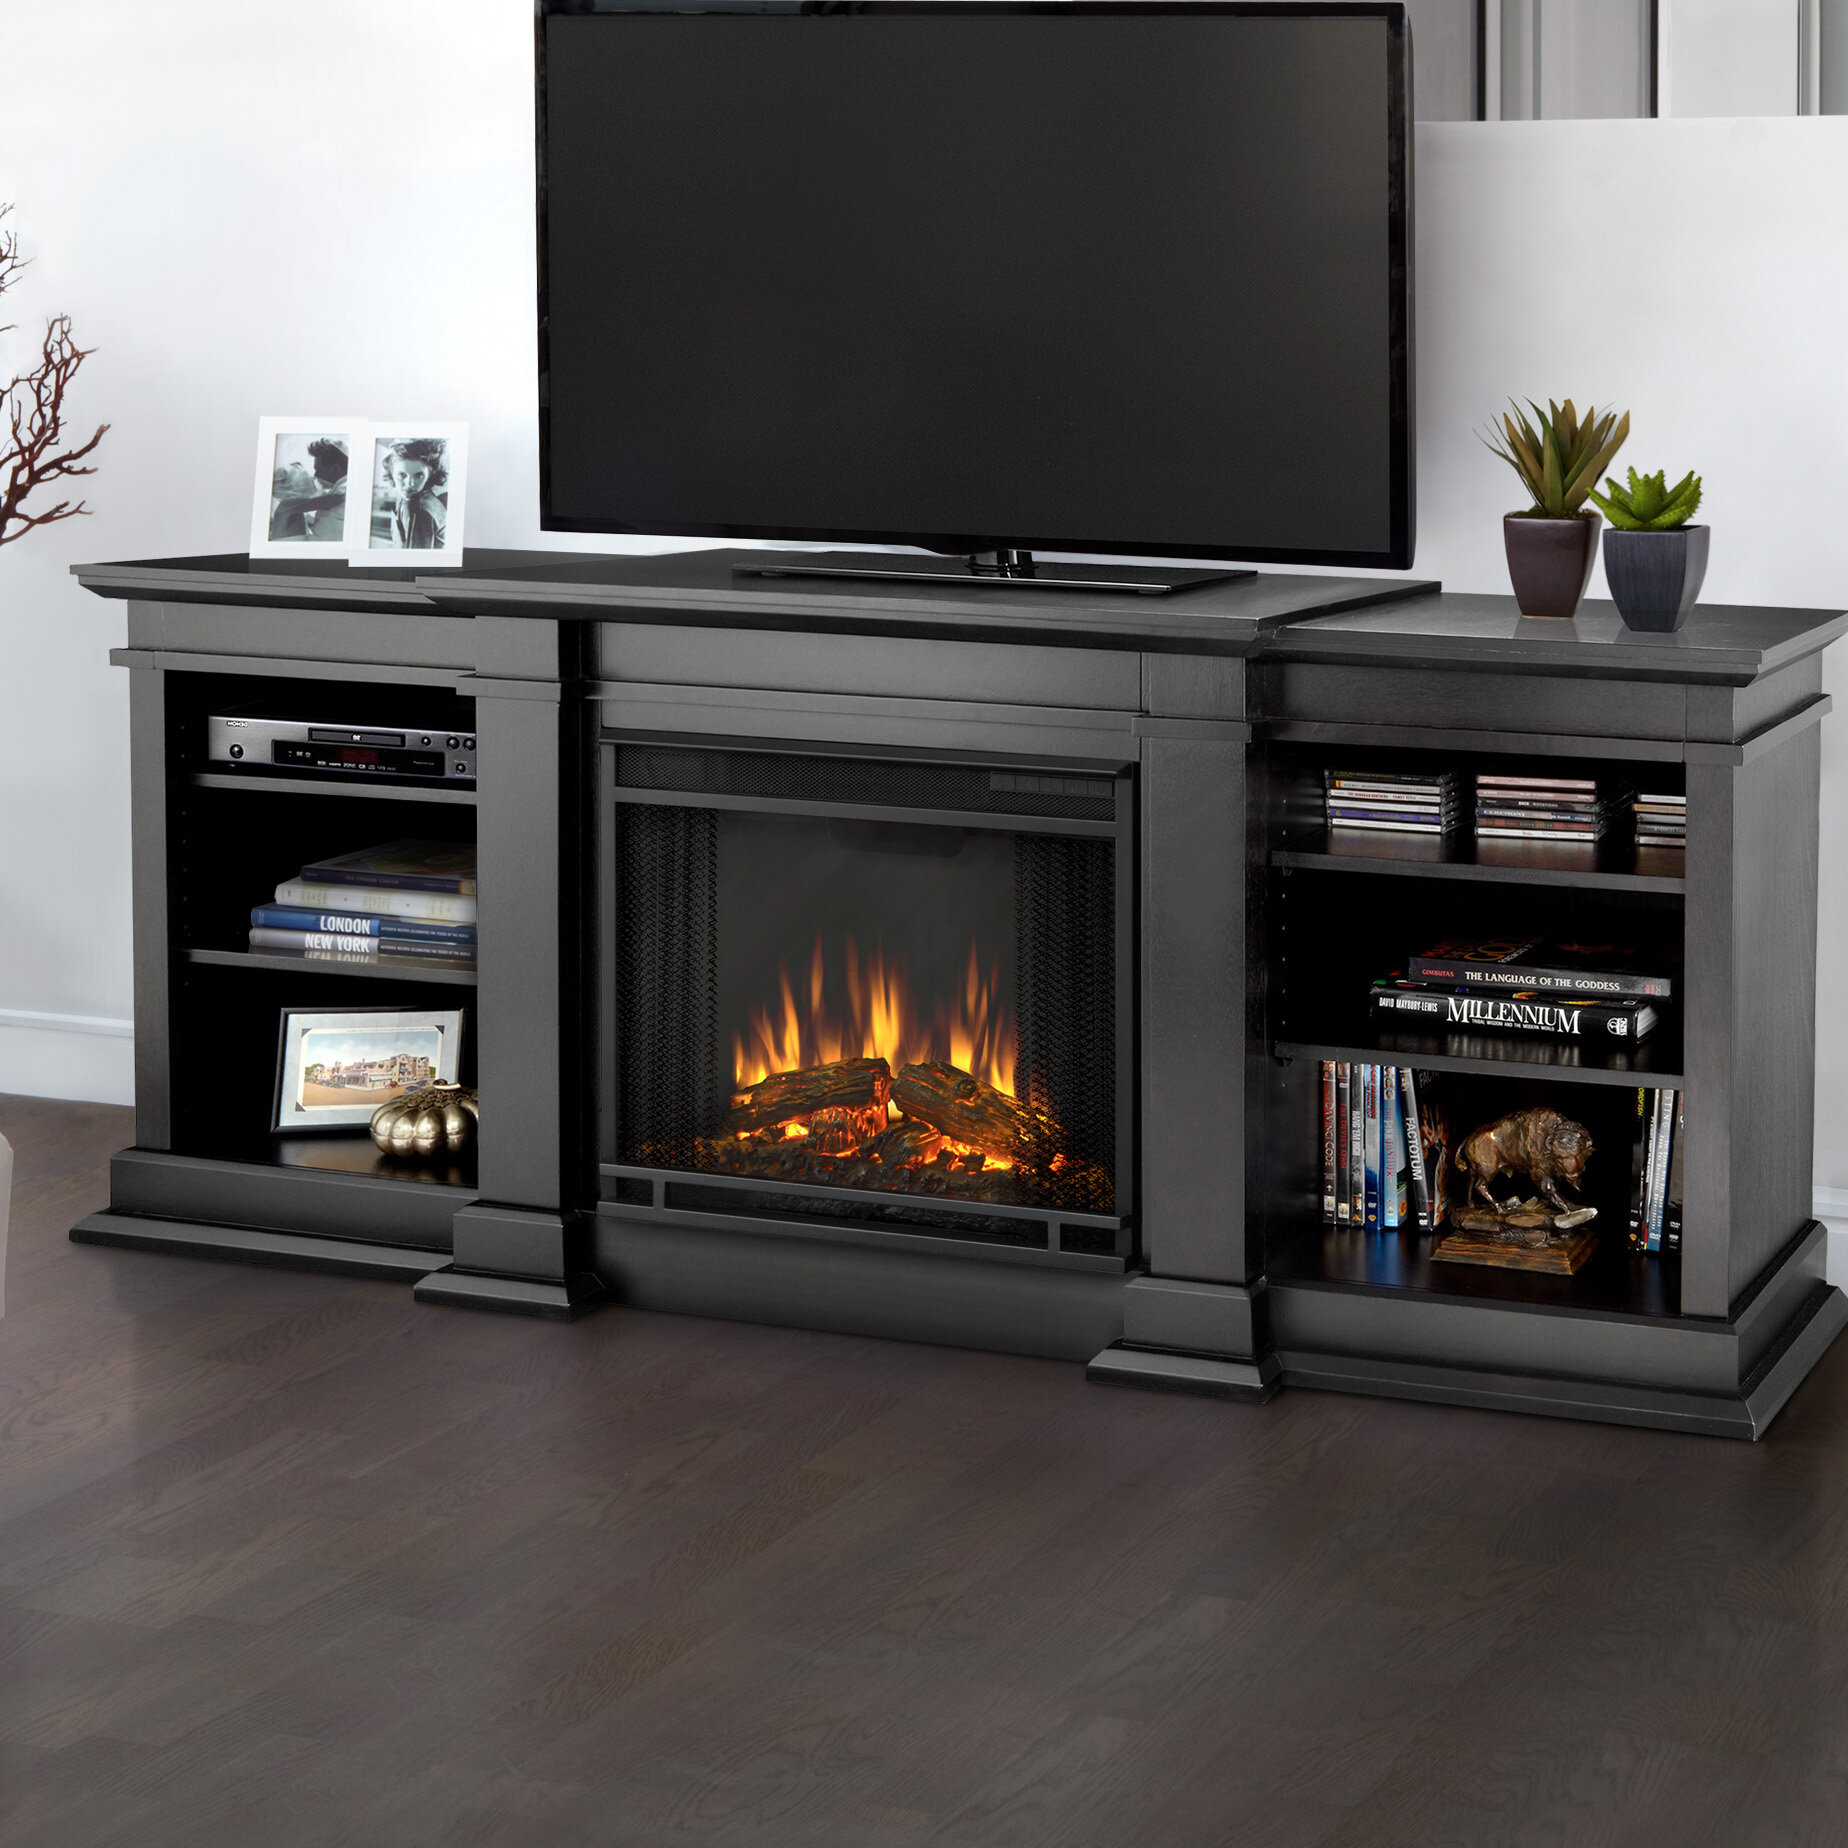 Tv Fireplace Wall Unit Designs Lovely 23 Fresh Electric Fireplace Wall Units Entertainment Center